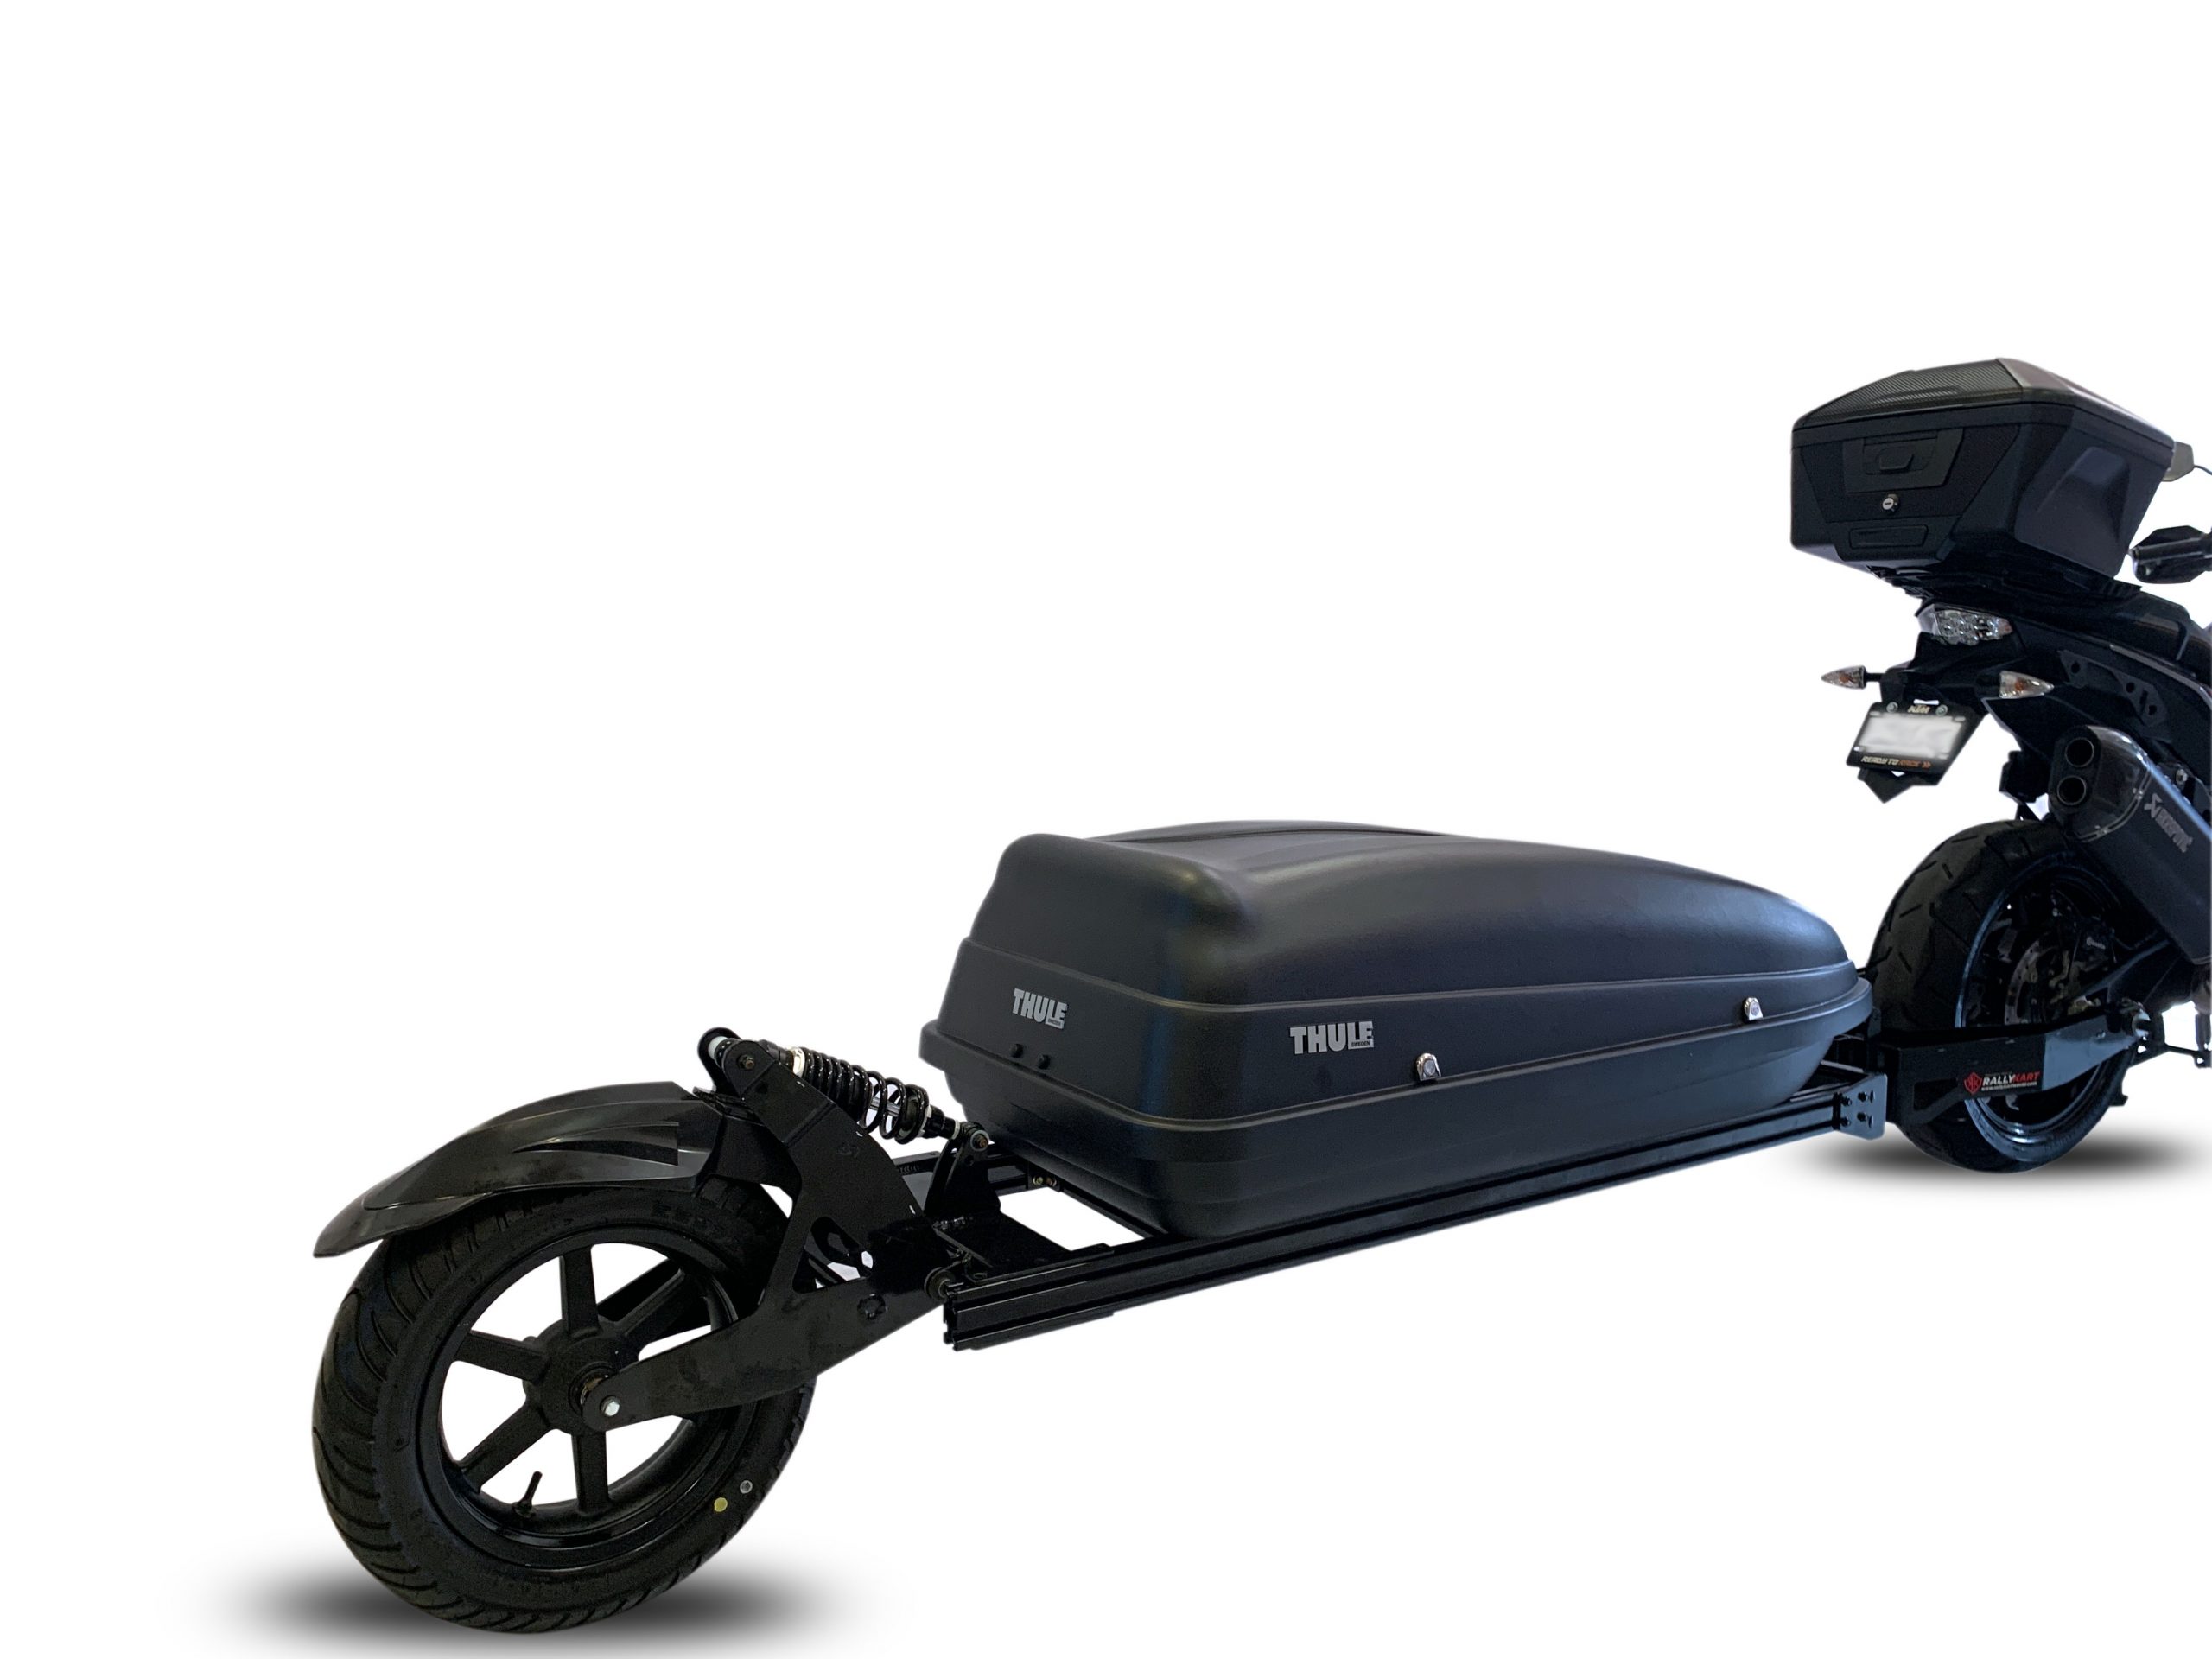 Motorcycle Trailer with Thule